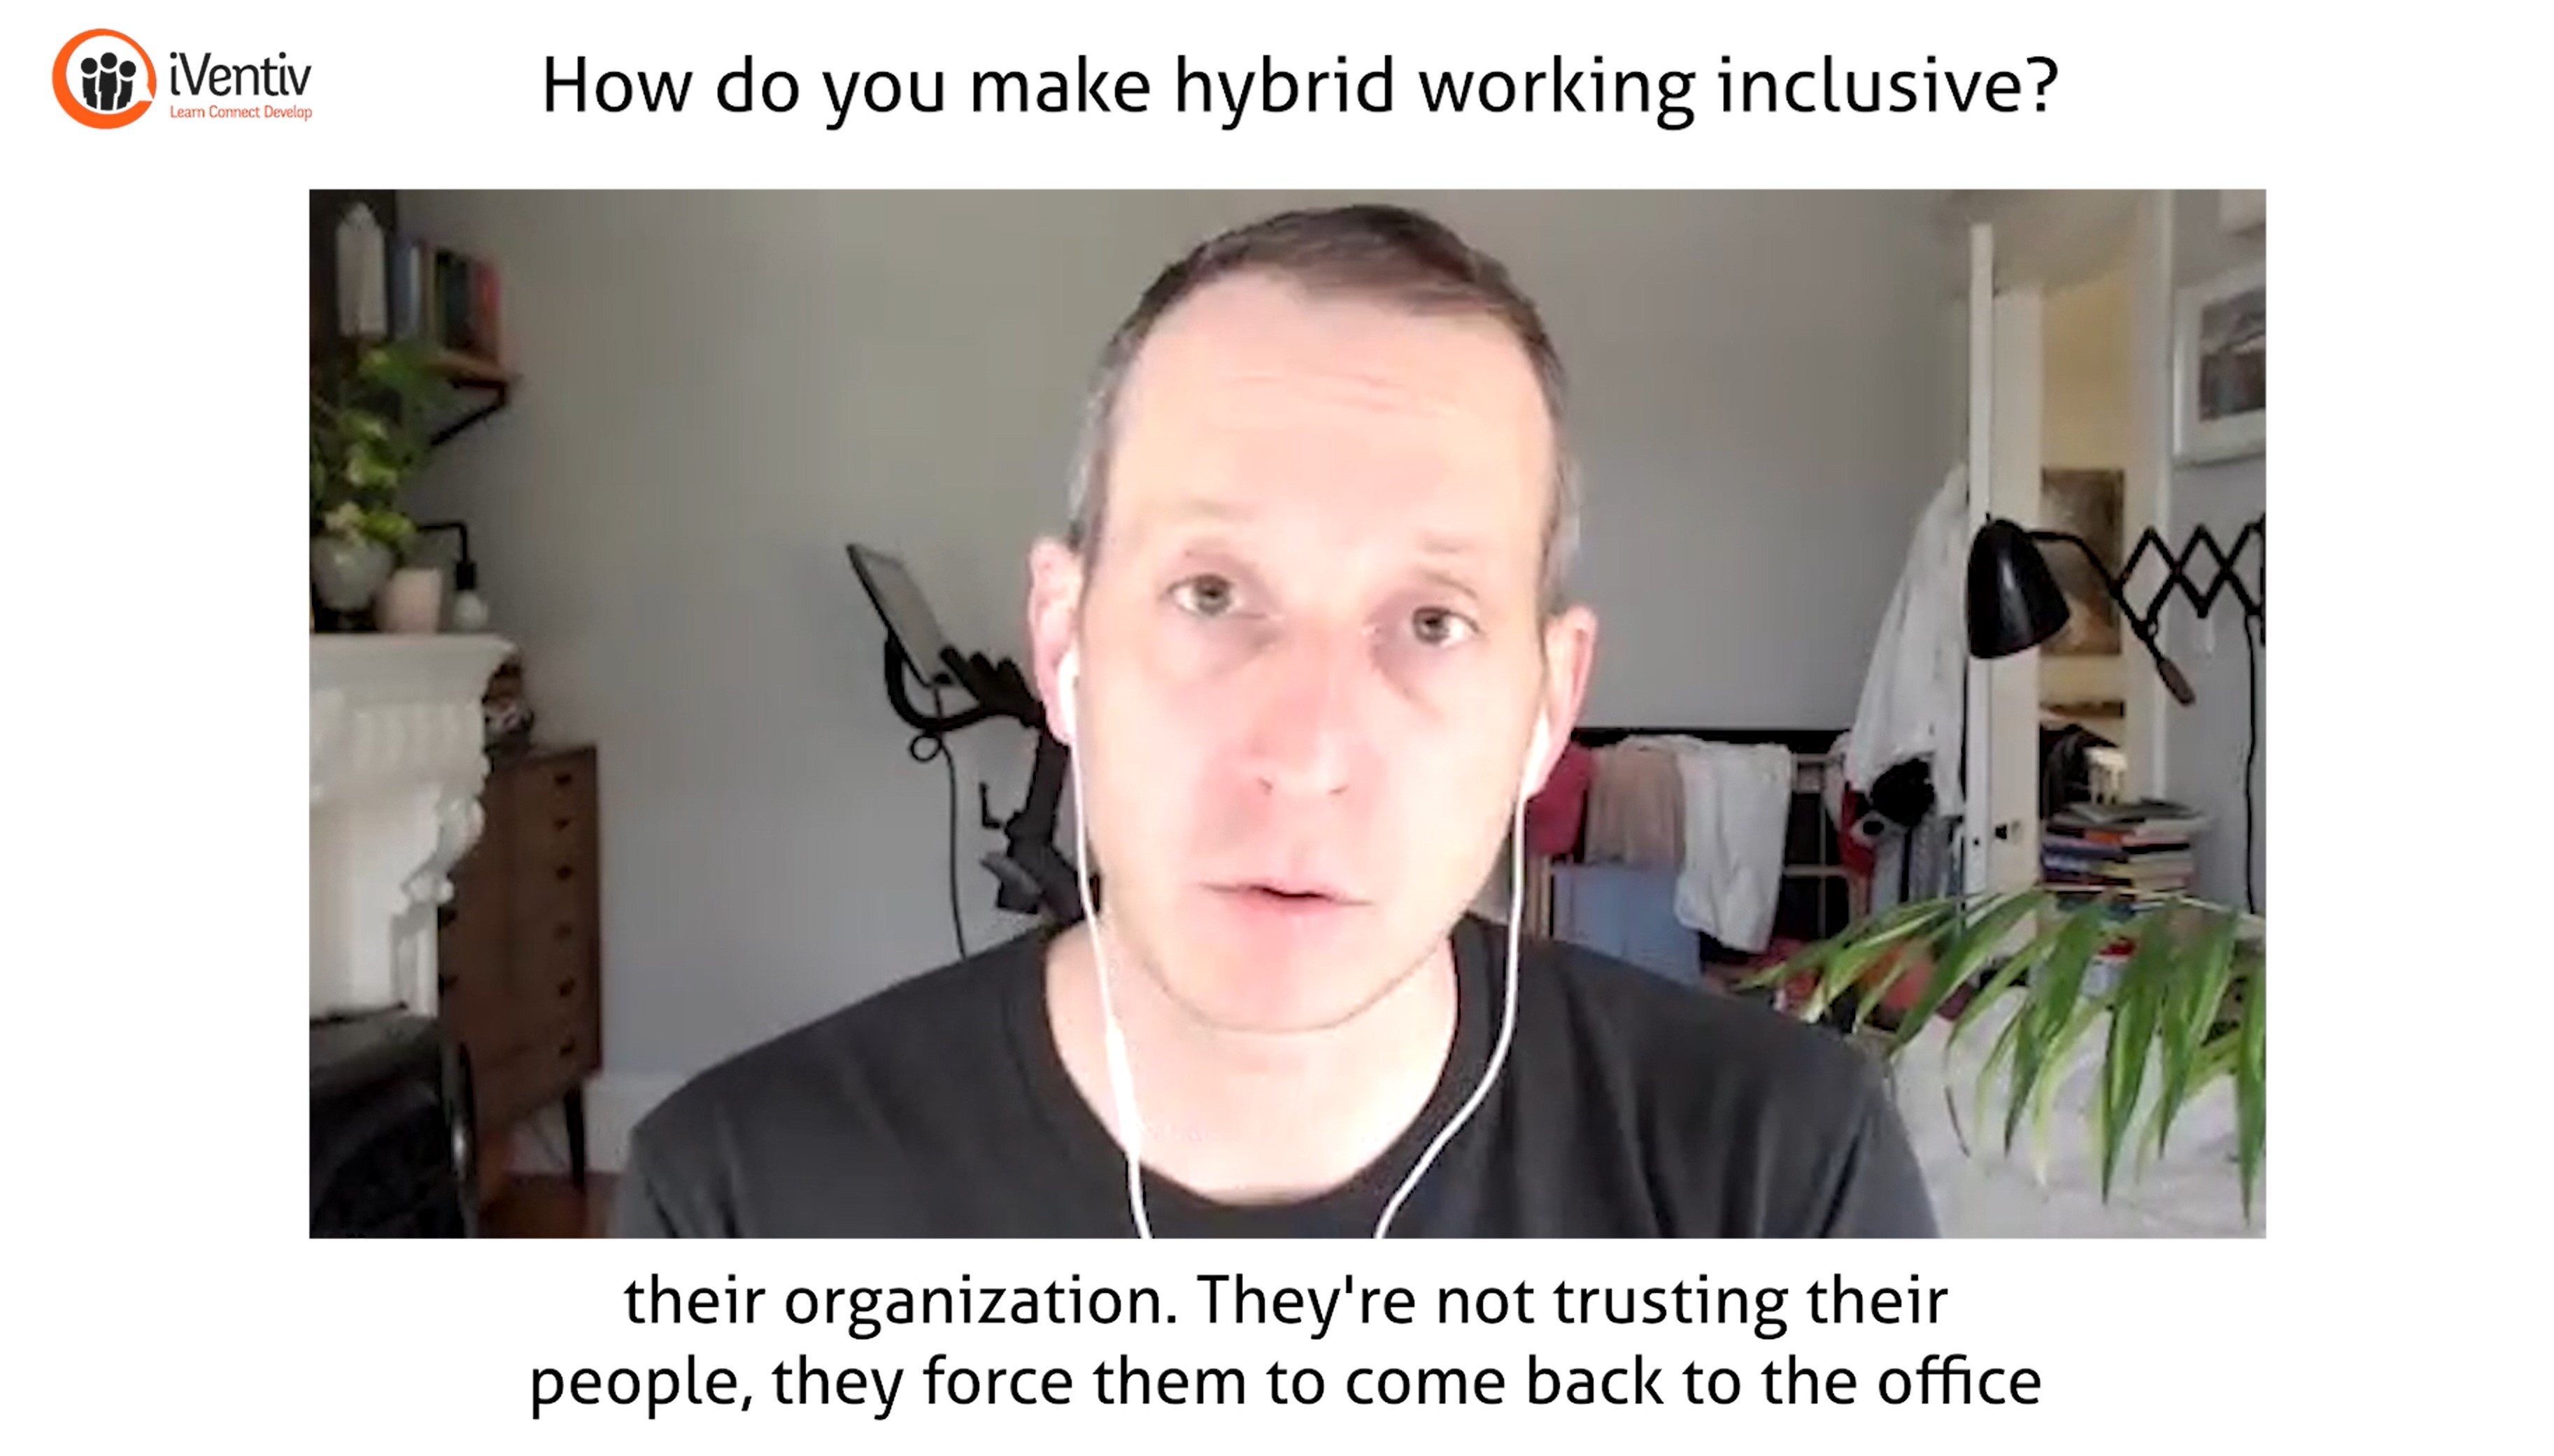 Uli Heitzlhofer, Lyft, explains that organisations need to trust their employees to work well in a hybrid model